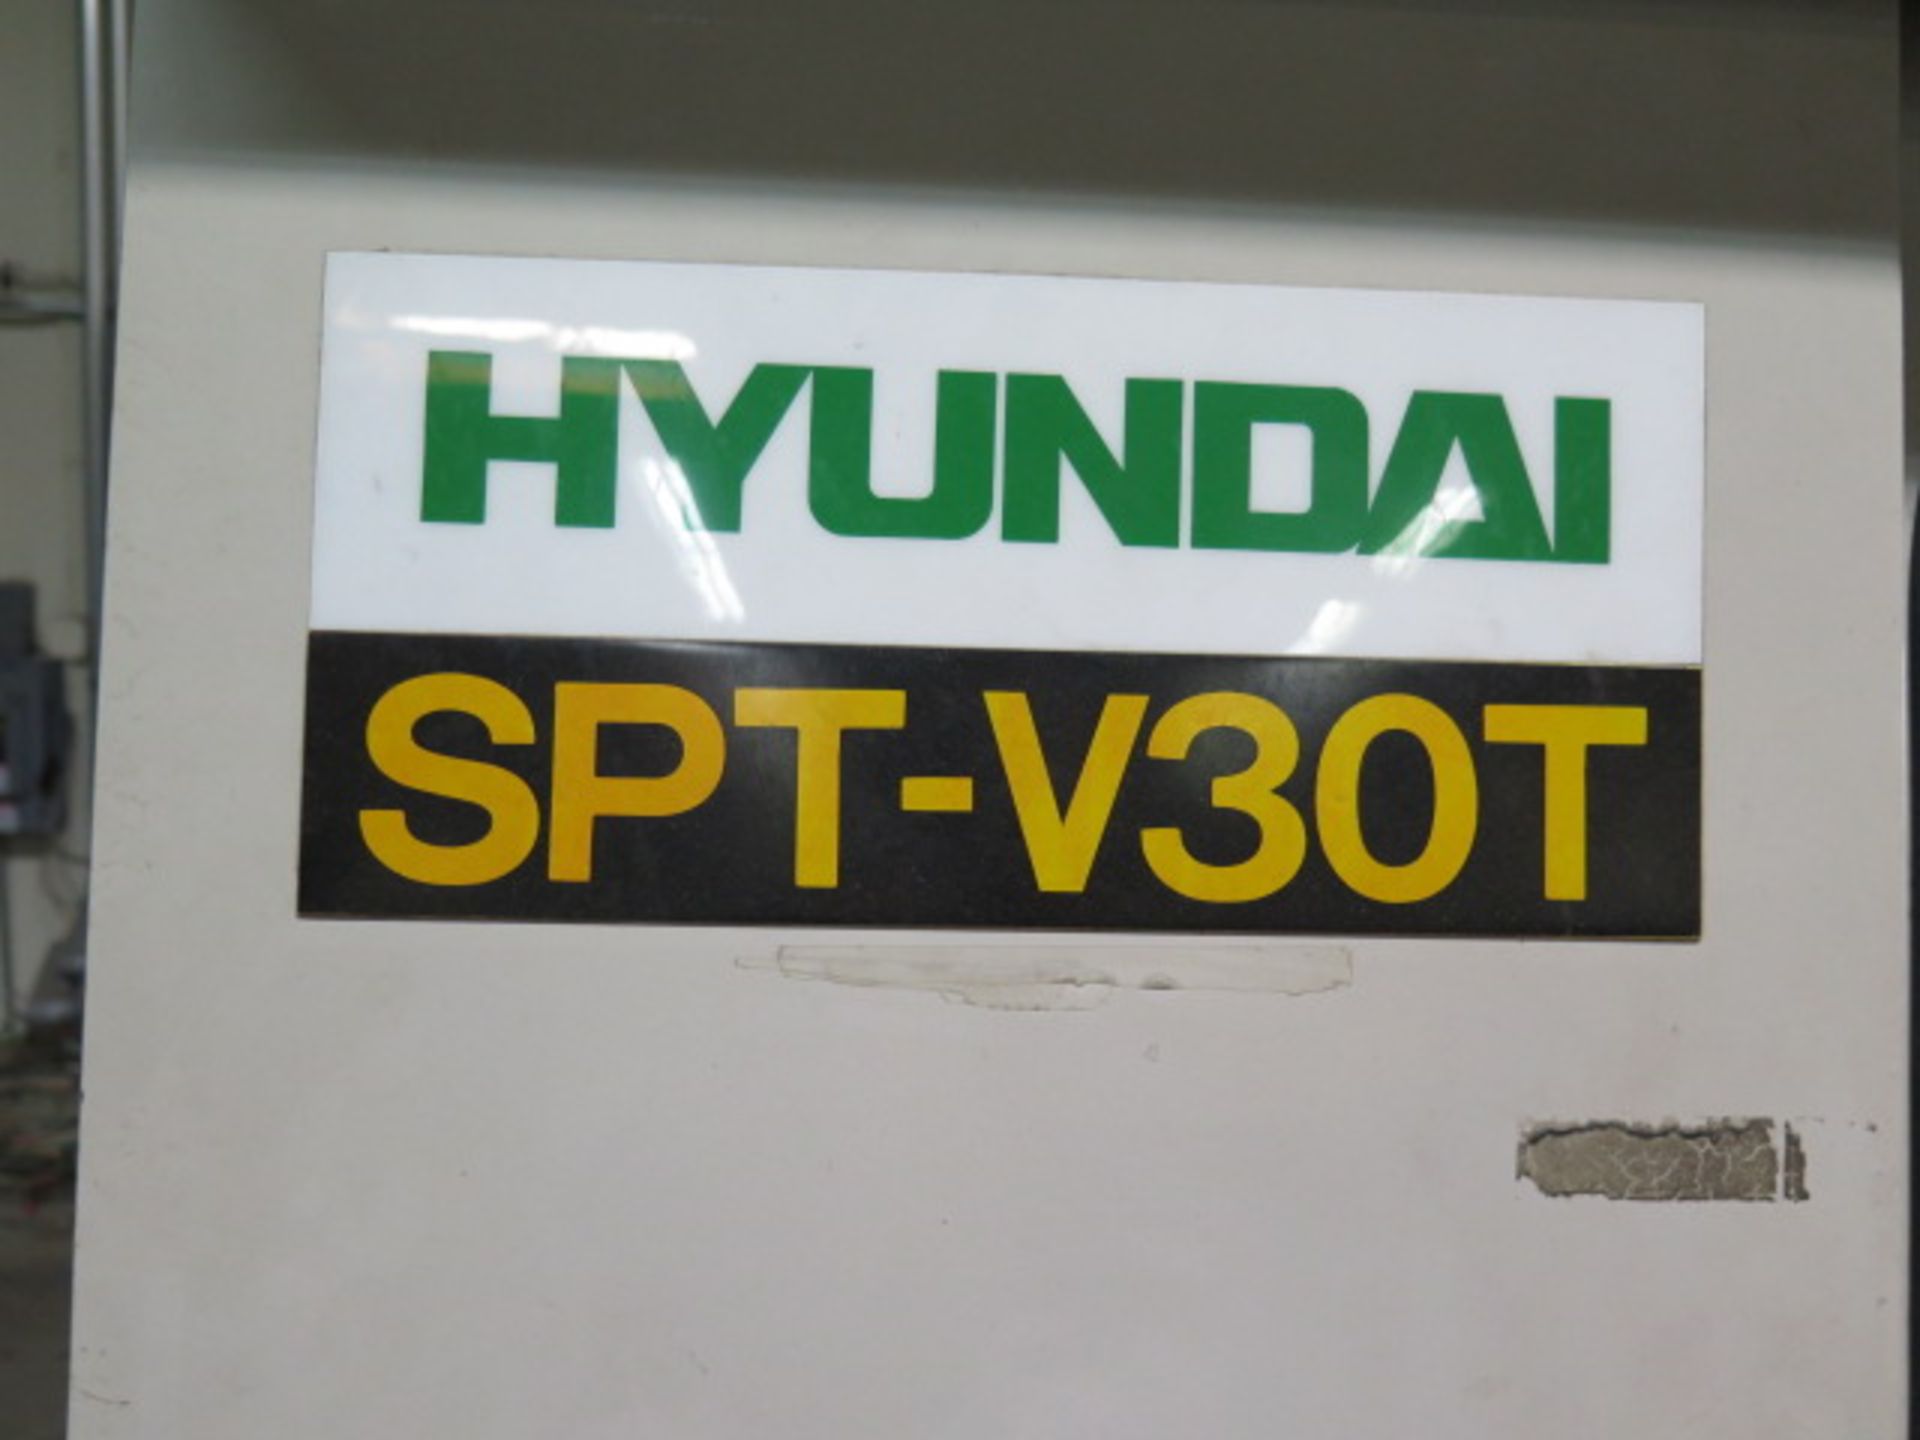 Hyundai SPT-V30T CNC Drilling and Tapping Center s/n 70D7029 w/ Yasnac MX3 SOLD AS IS - Image 4 of 16